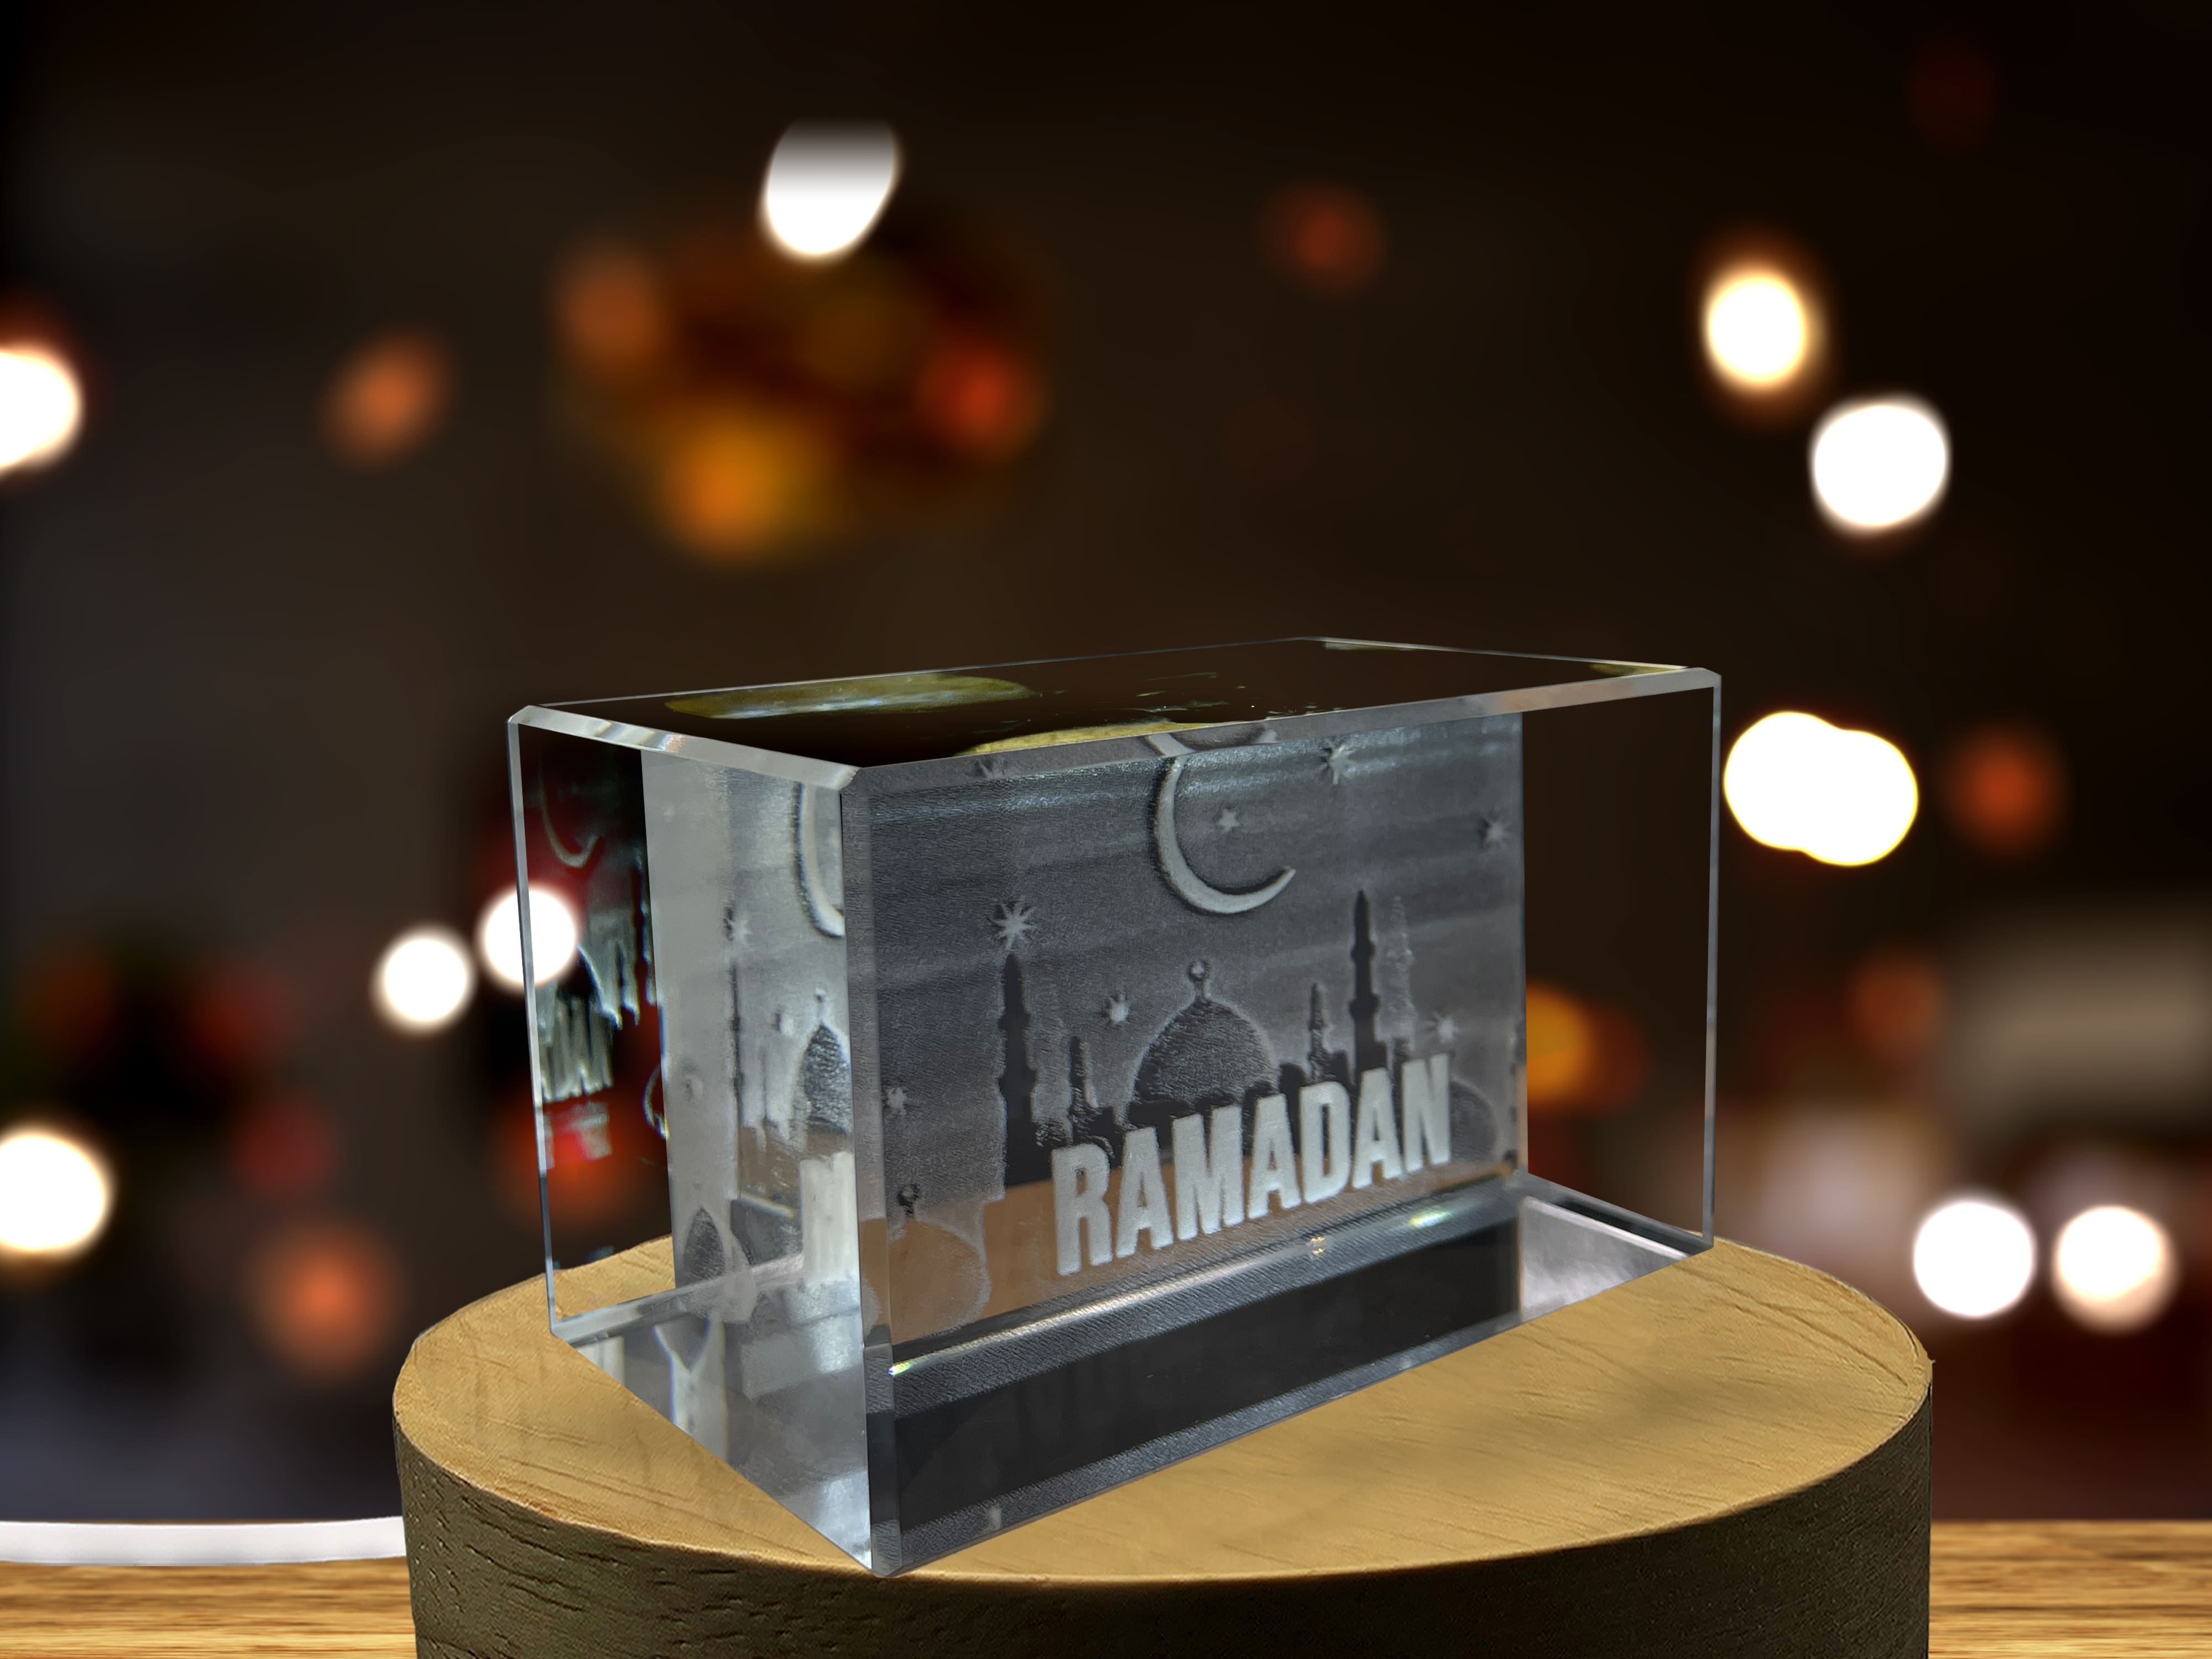 Ramadan| 3D-Engraved-Crystal-Keepsake | Gift/Decor| Collectible | Souvenir | personalized-3D-crystal-photo-gift |Customized-3d-photo-Engraved-Crystal | Home-decor A&B Crystal Collection